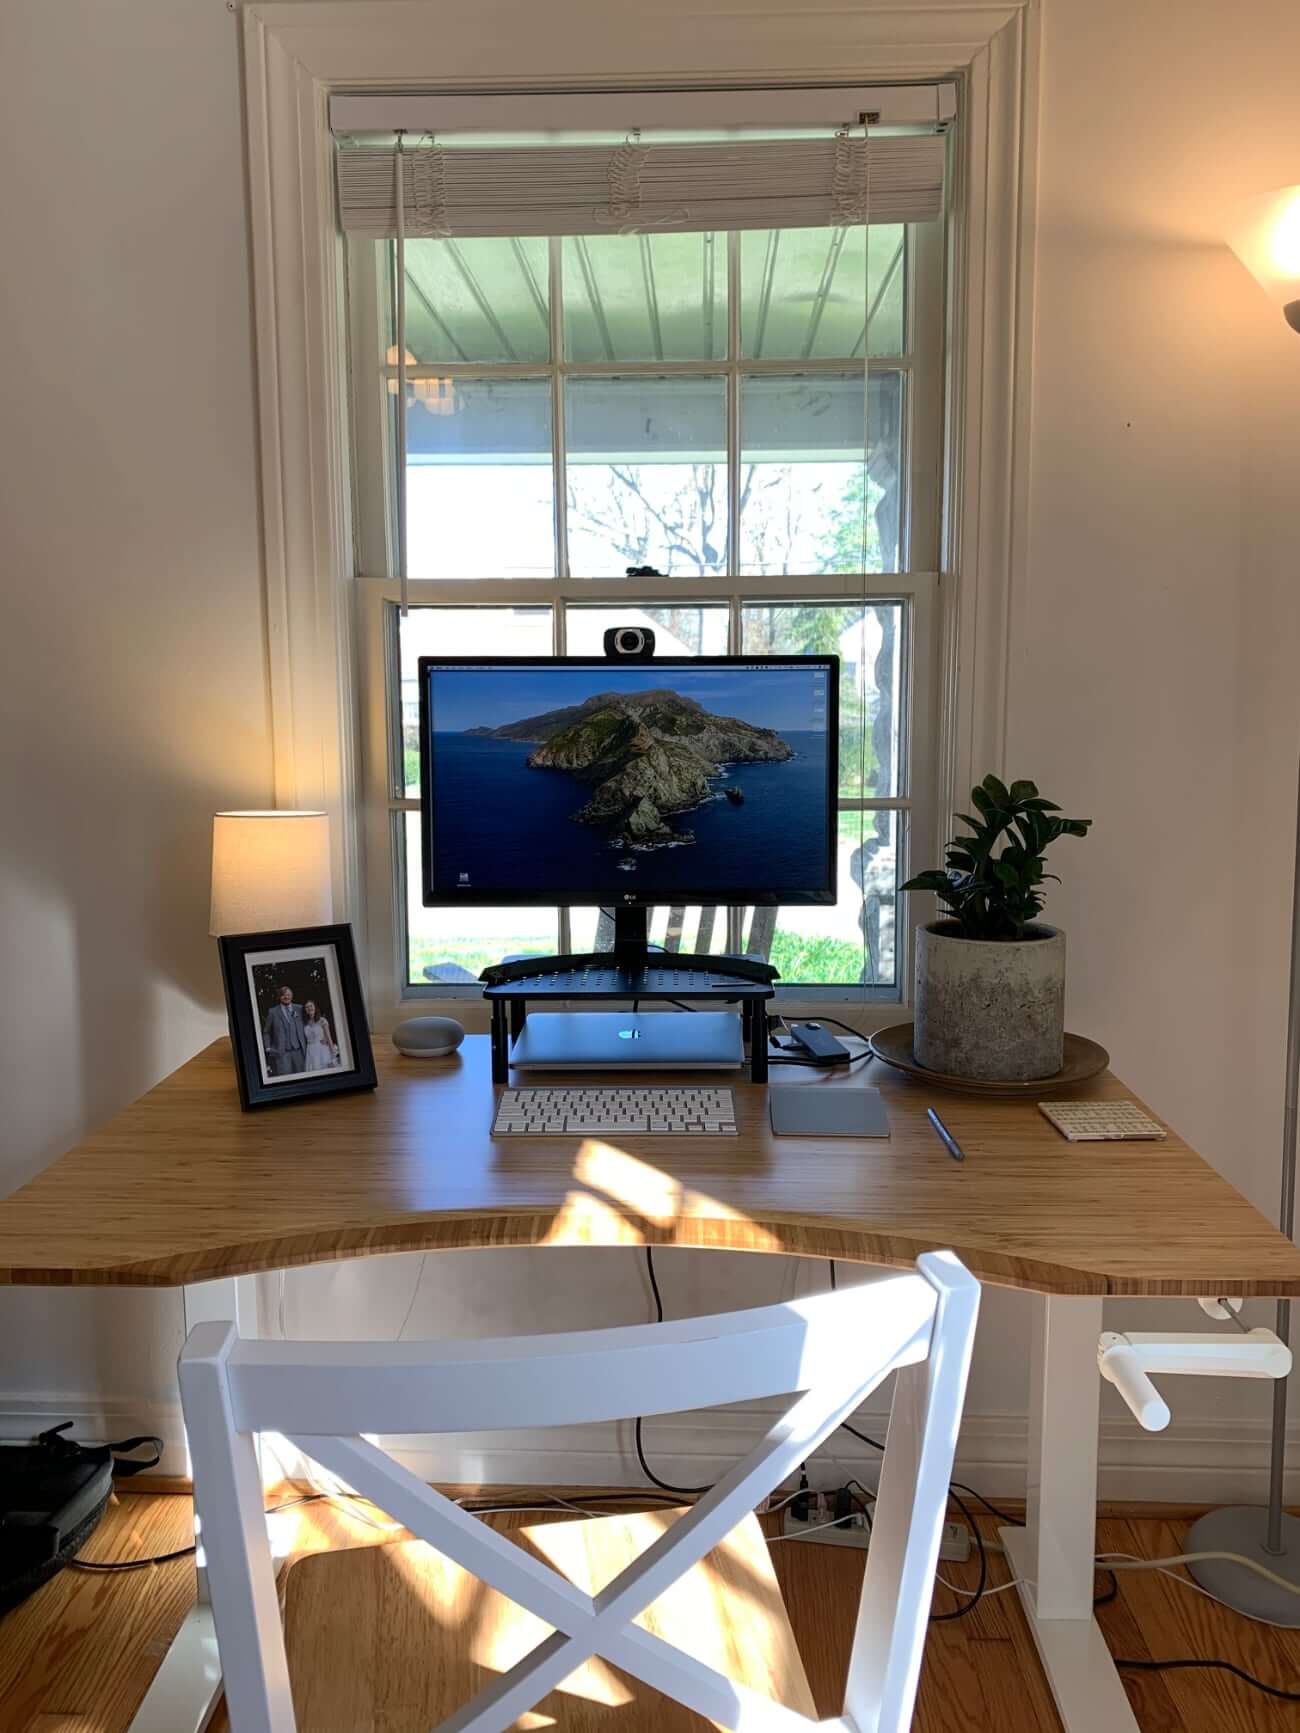 Image of Chris's desk in front of a large window